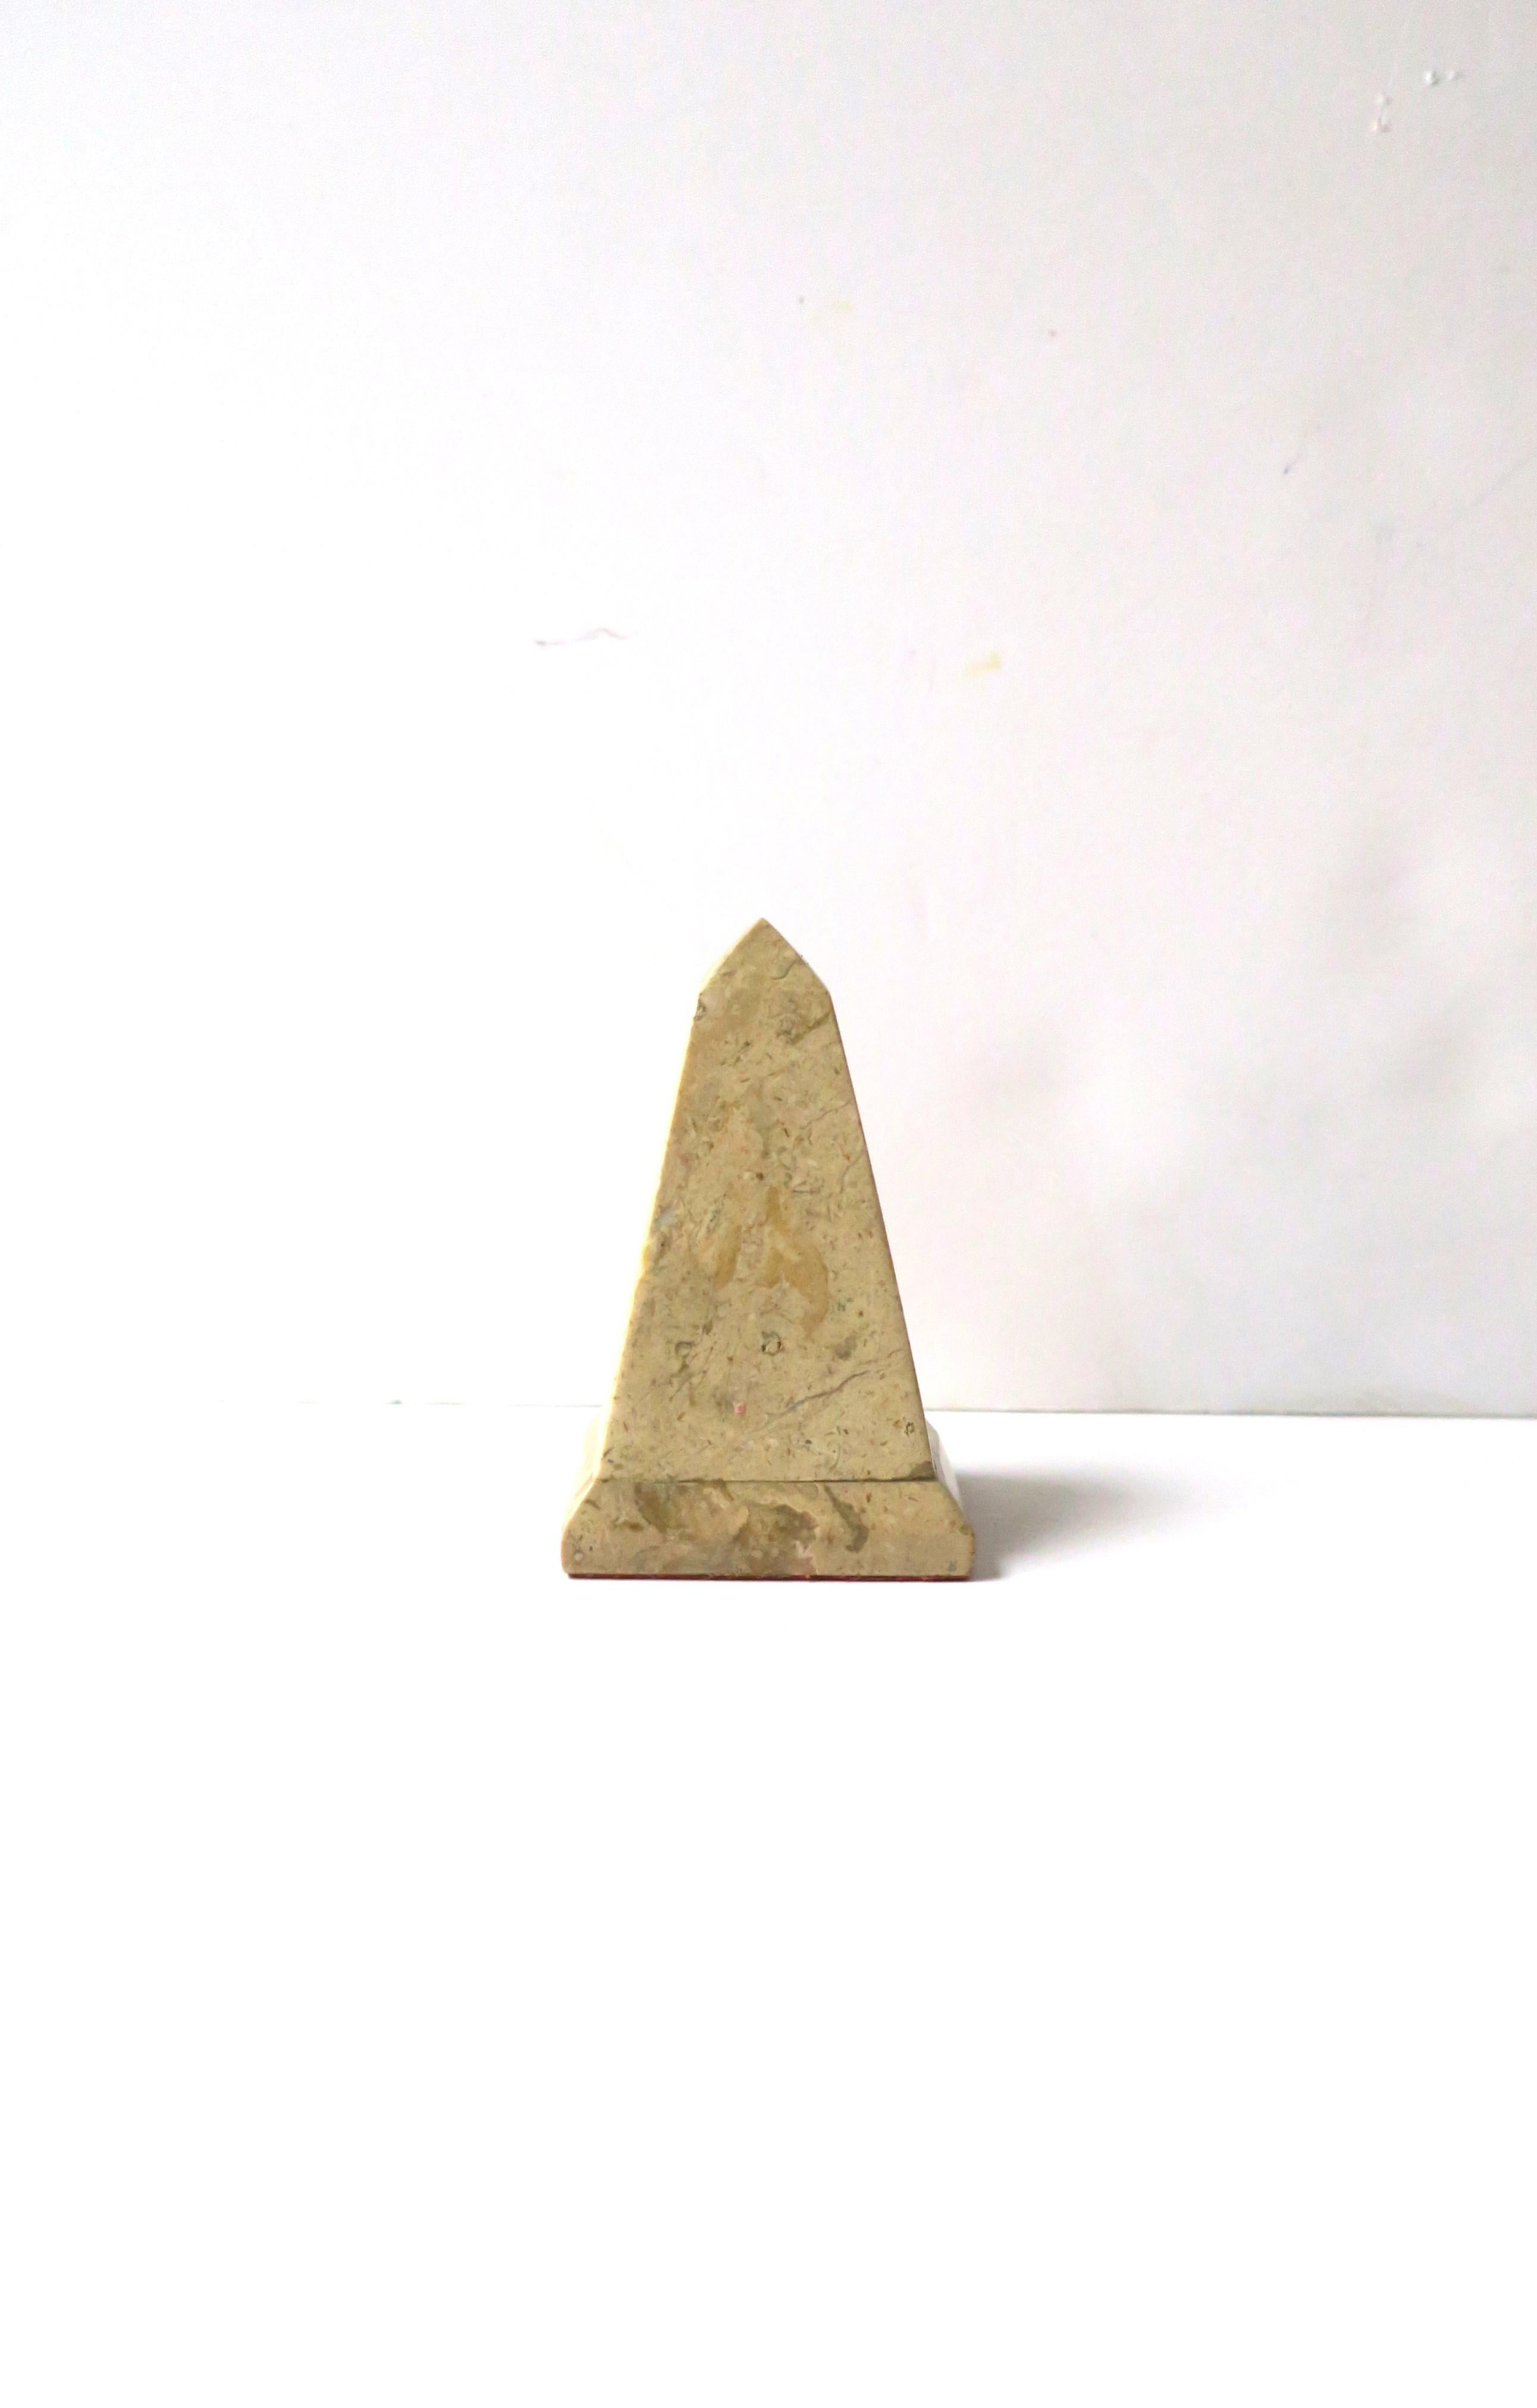 A small, neutral, marble obelisk, in the Modern style, circa mid to late-20th century, 1960s, 1970s. Marble is a neutral marble stone similar to the hue of travertine marble. Piece makes a great decorative object for a bookshelf, desk, home office